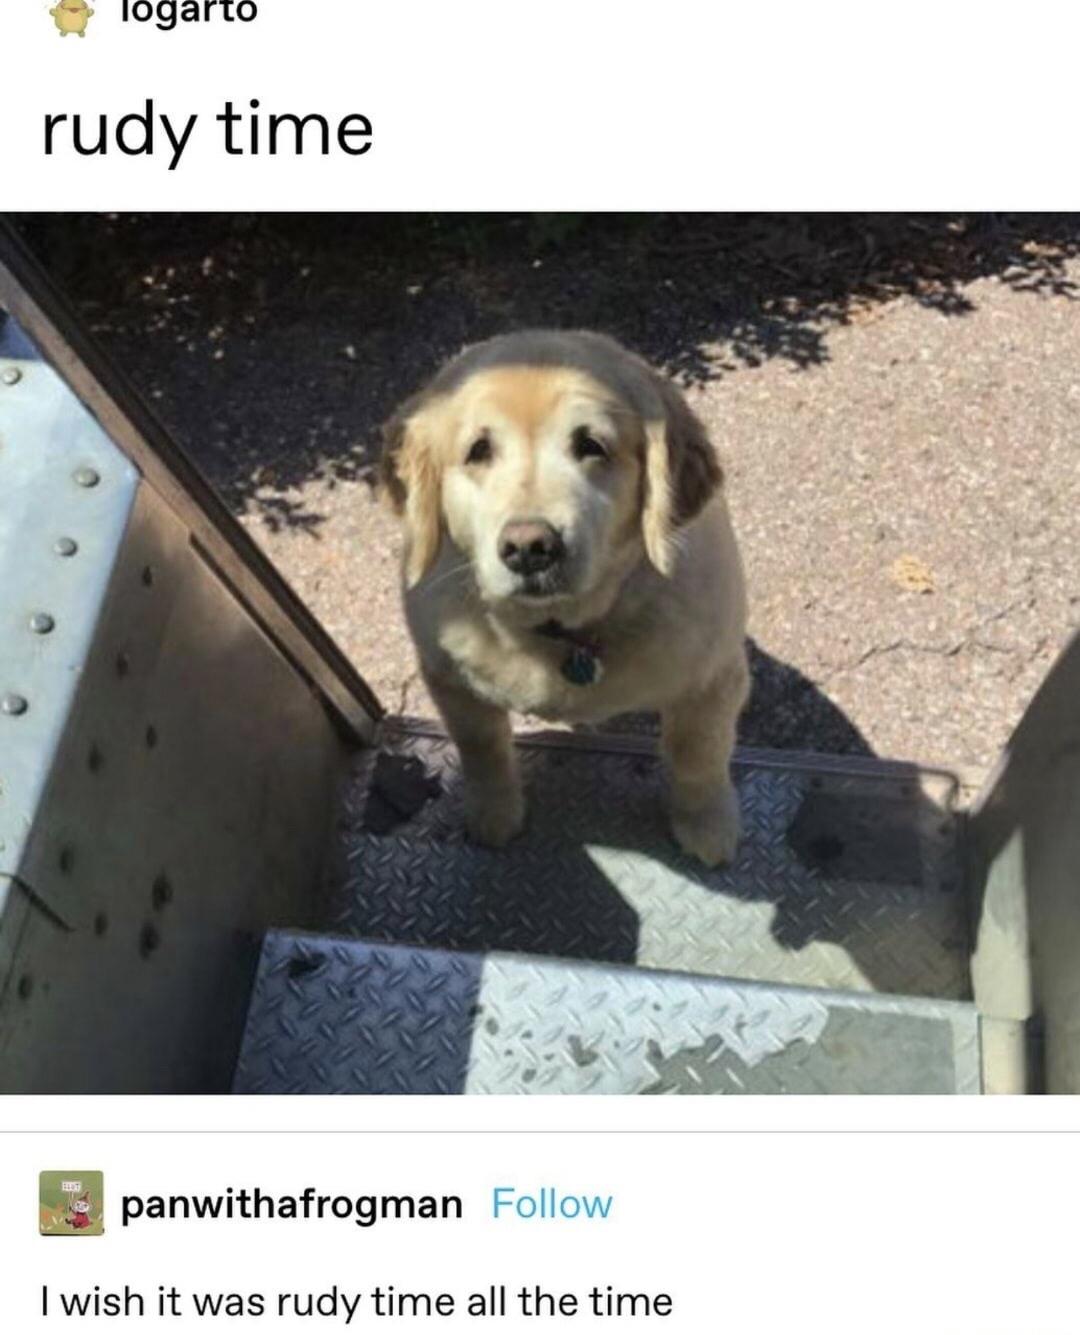 ups dog meme - logarto rudy time panwithafrogman I wish it was rudy time all the time